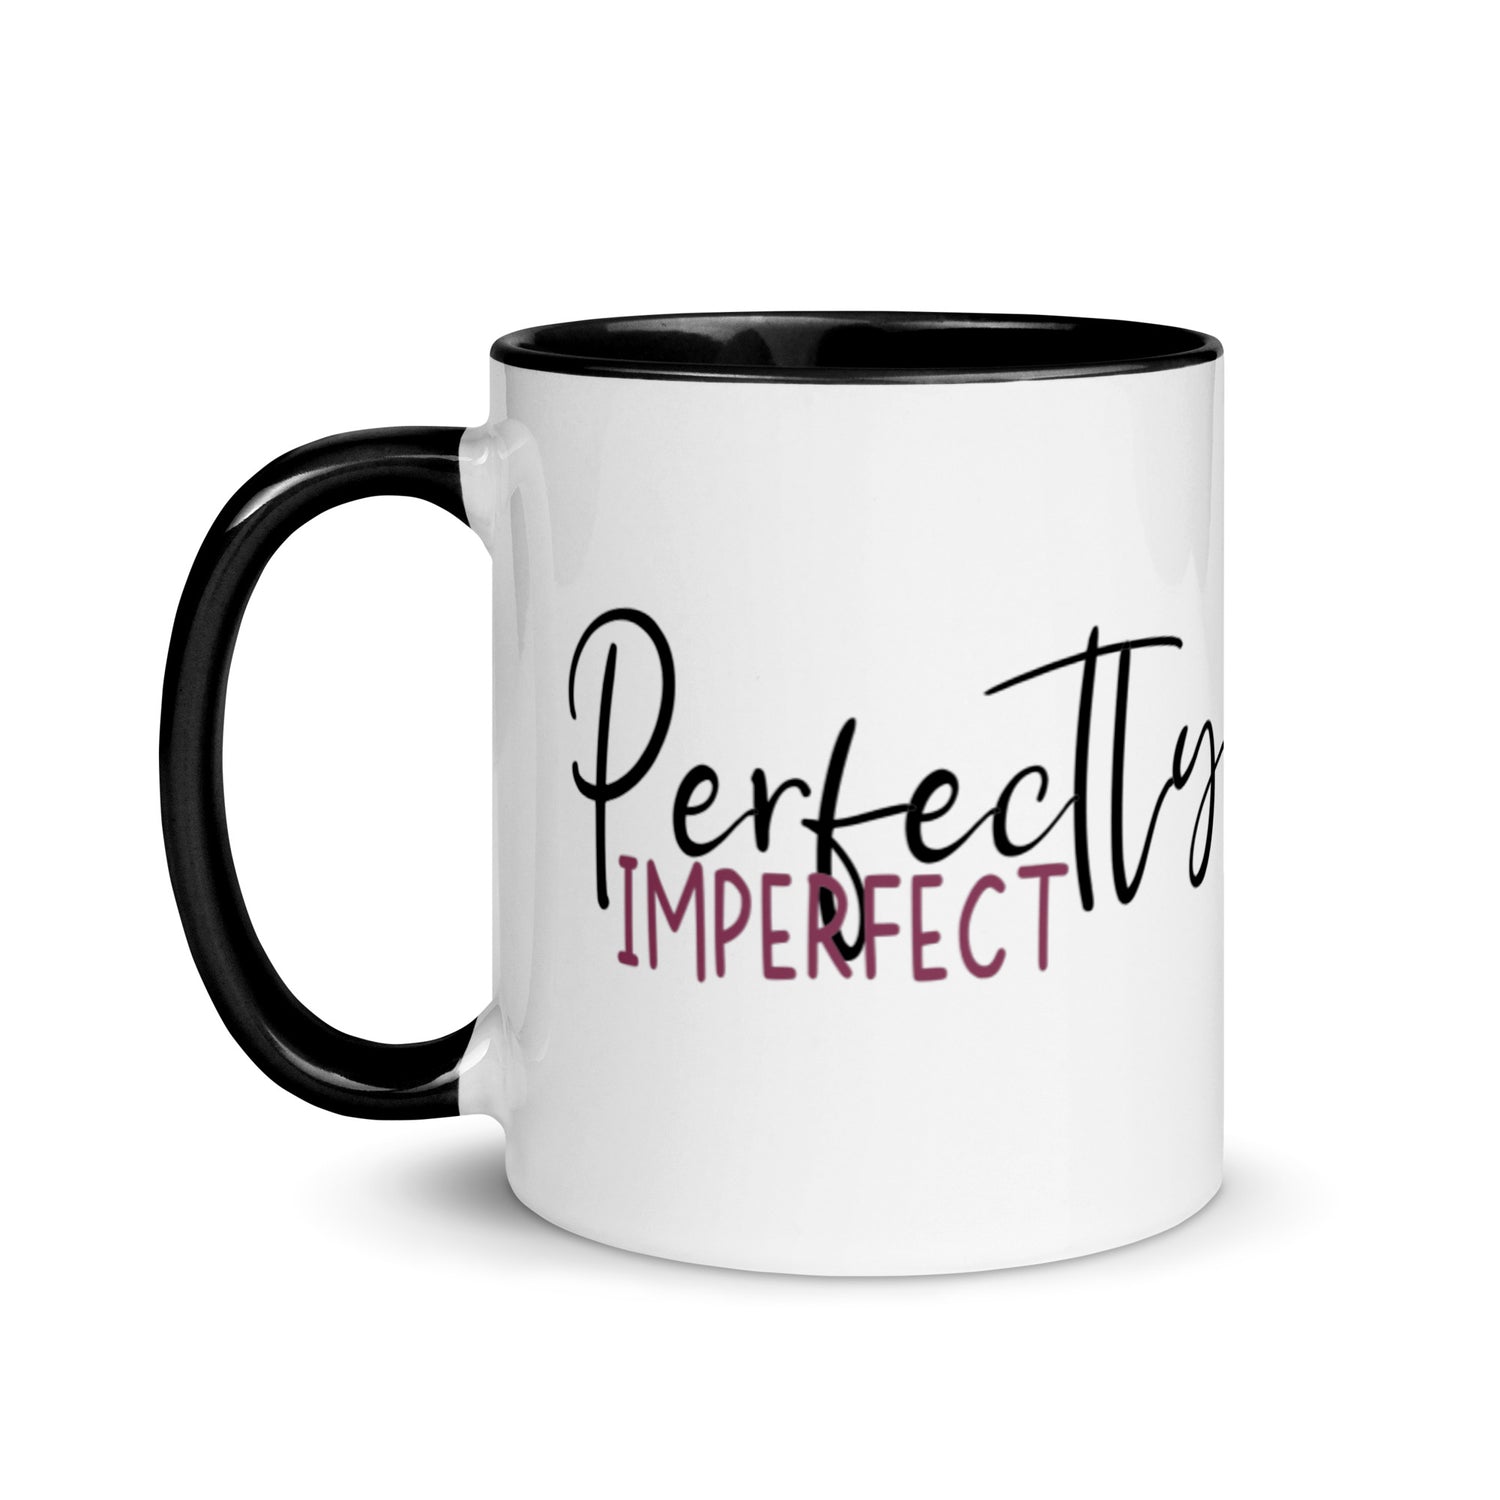 Perfectly imperfect mug with black interior and handle